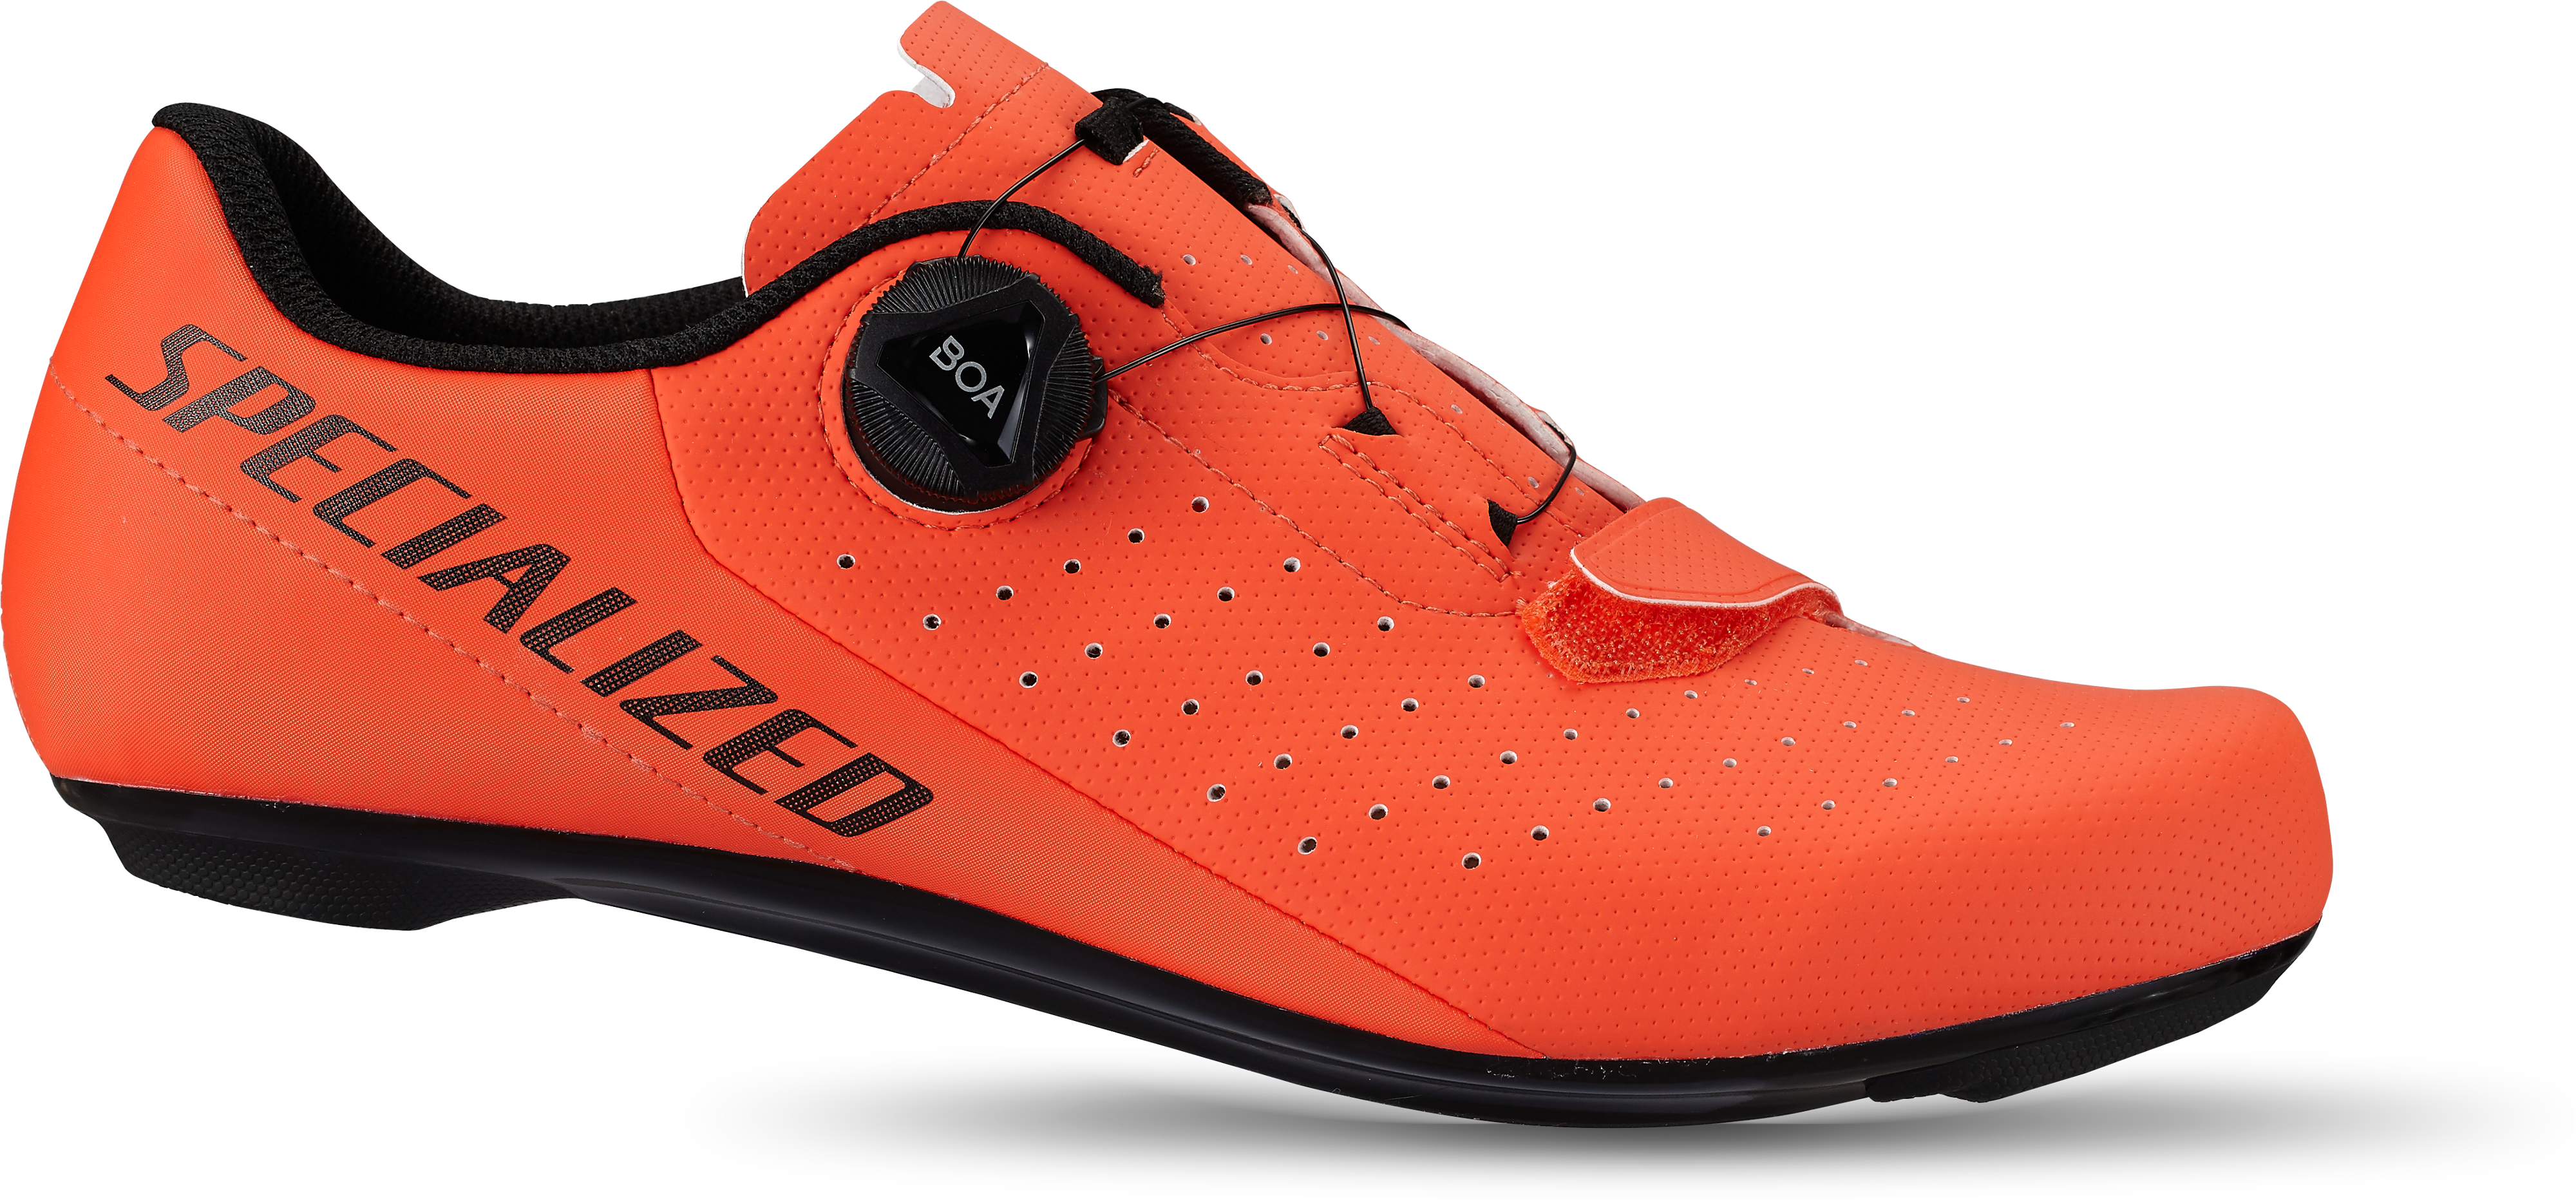 TORCH 1.0 ROAD SHOES CCTSBLM/DUNEWHT/RSTDRED 40(40 